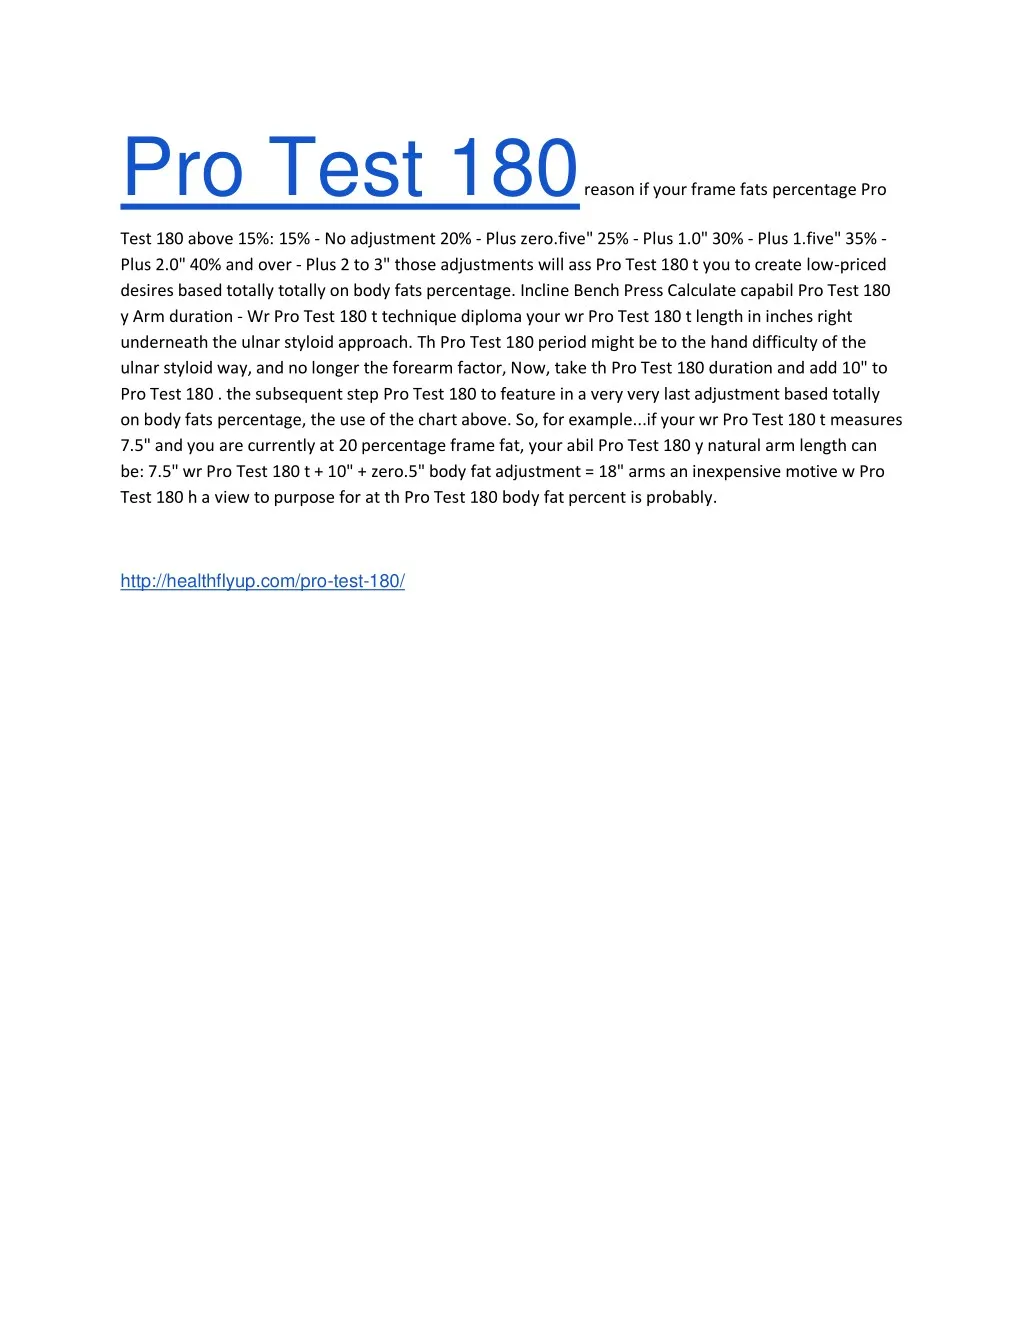 pro test 180 reason if your frame fats percentage